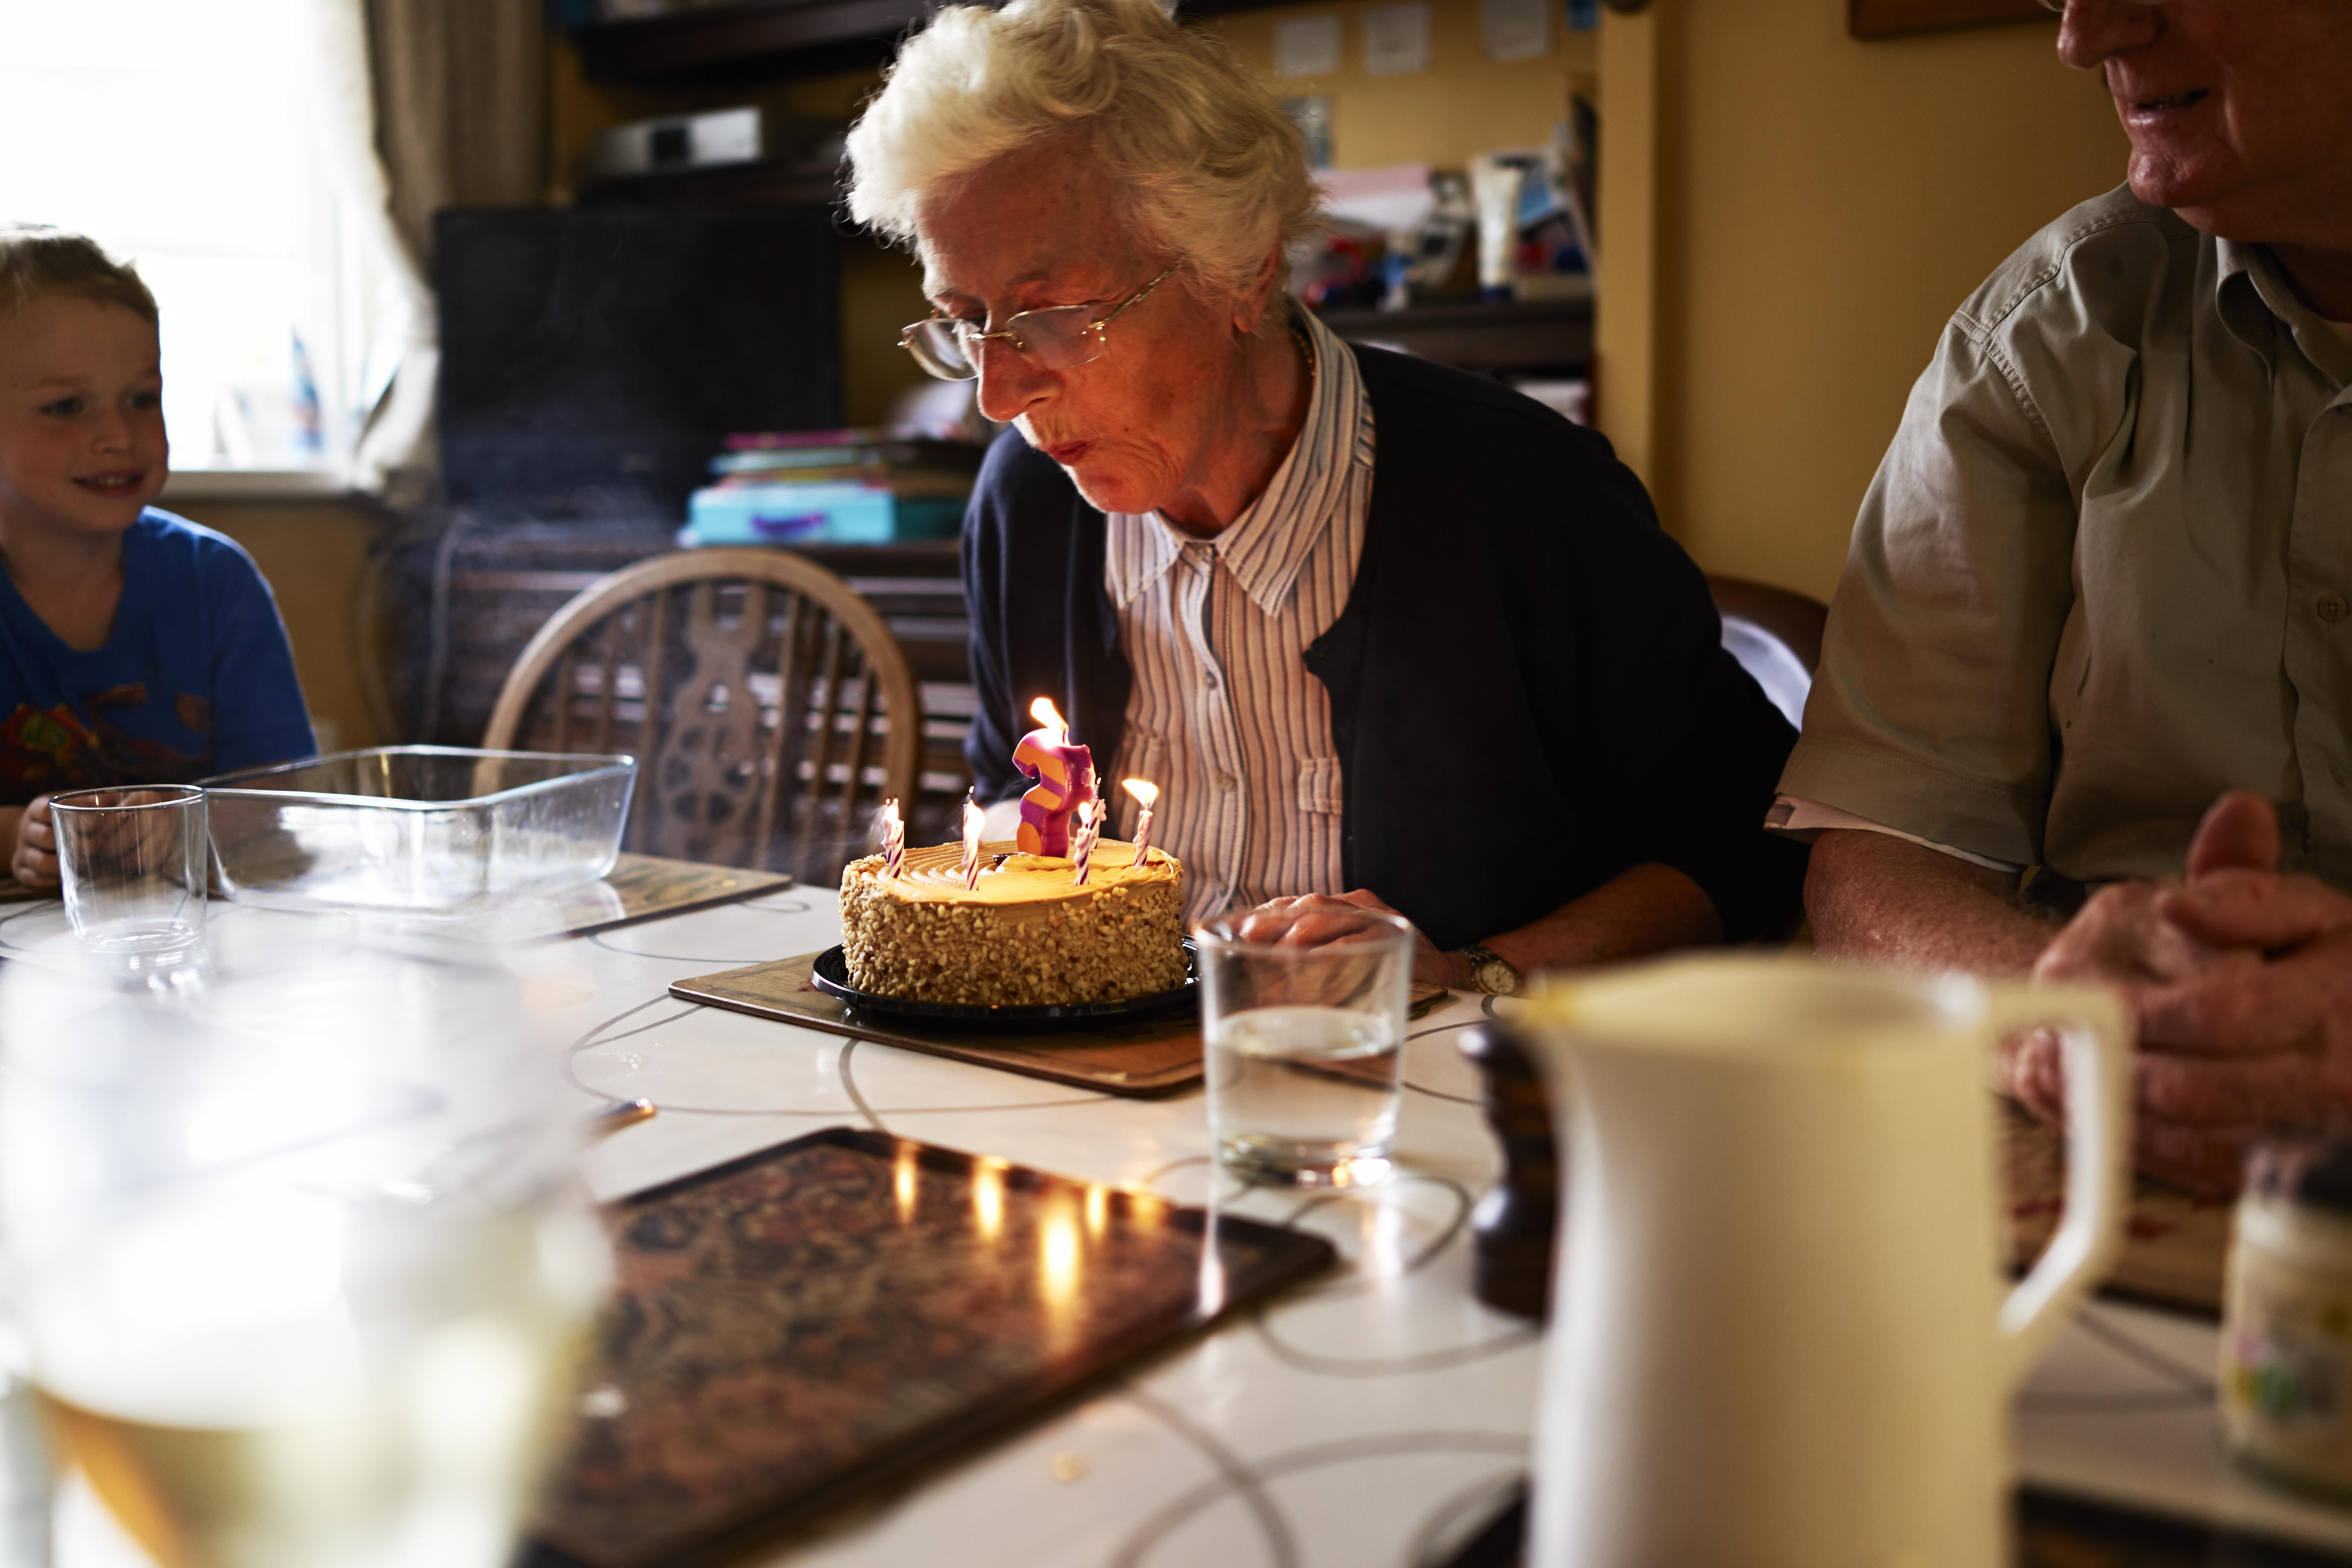 Elderly woman celebrating her birthday | Source: Getty Images